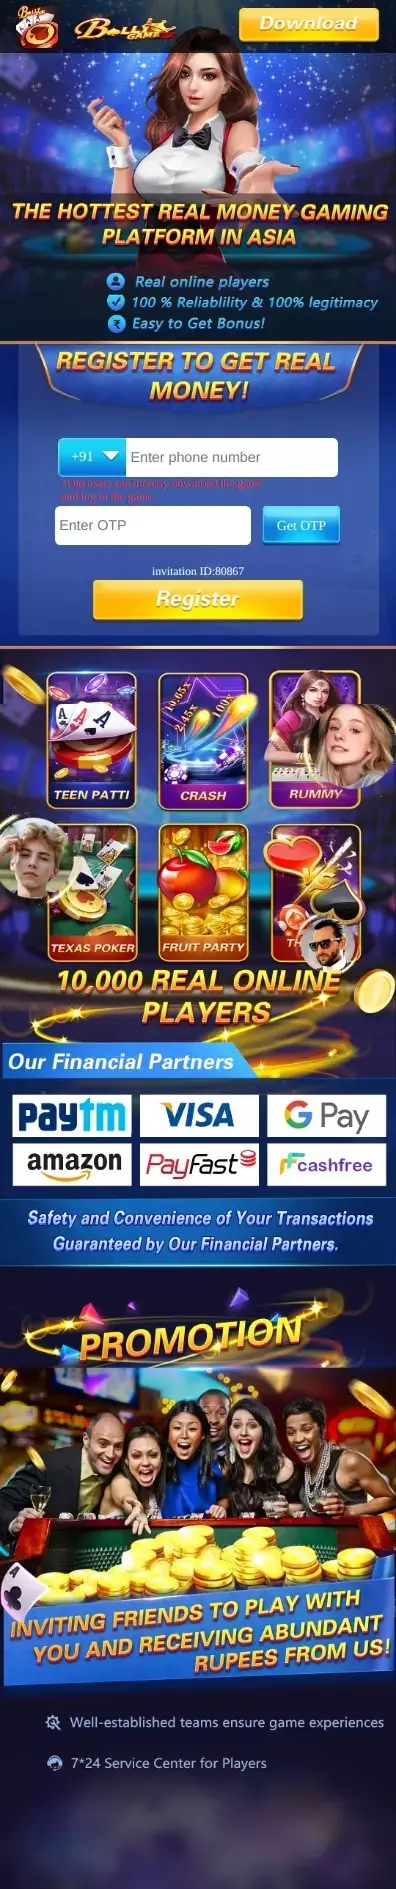 Bolly Game APK Download, Bolly Game Rummy App and Real Money Earning Game can Be downloaded the latest version of this app is available here.
Bolly Game resembles amny light weight real money gaming apps like Teen Patti Master but you should download and use the app on your own risk